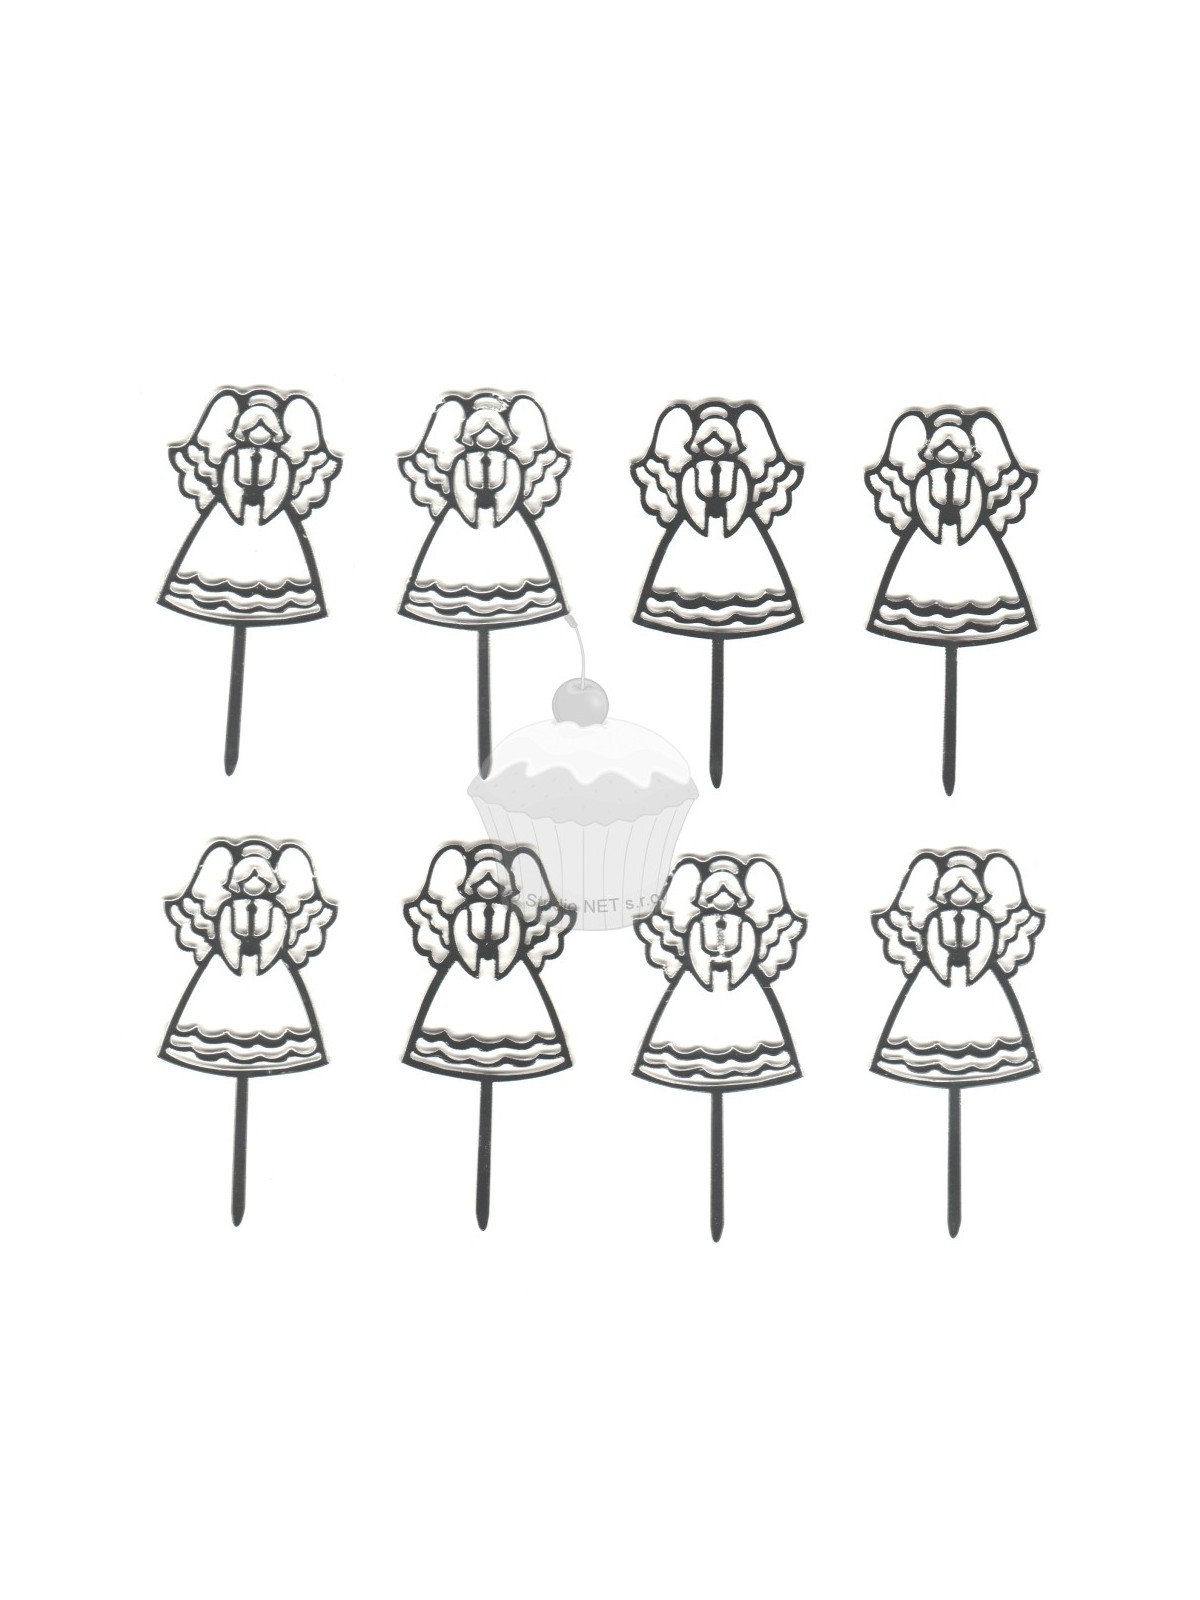 Spikes small - angel - 8pc